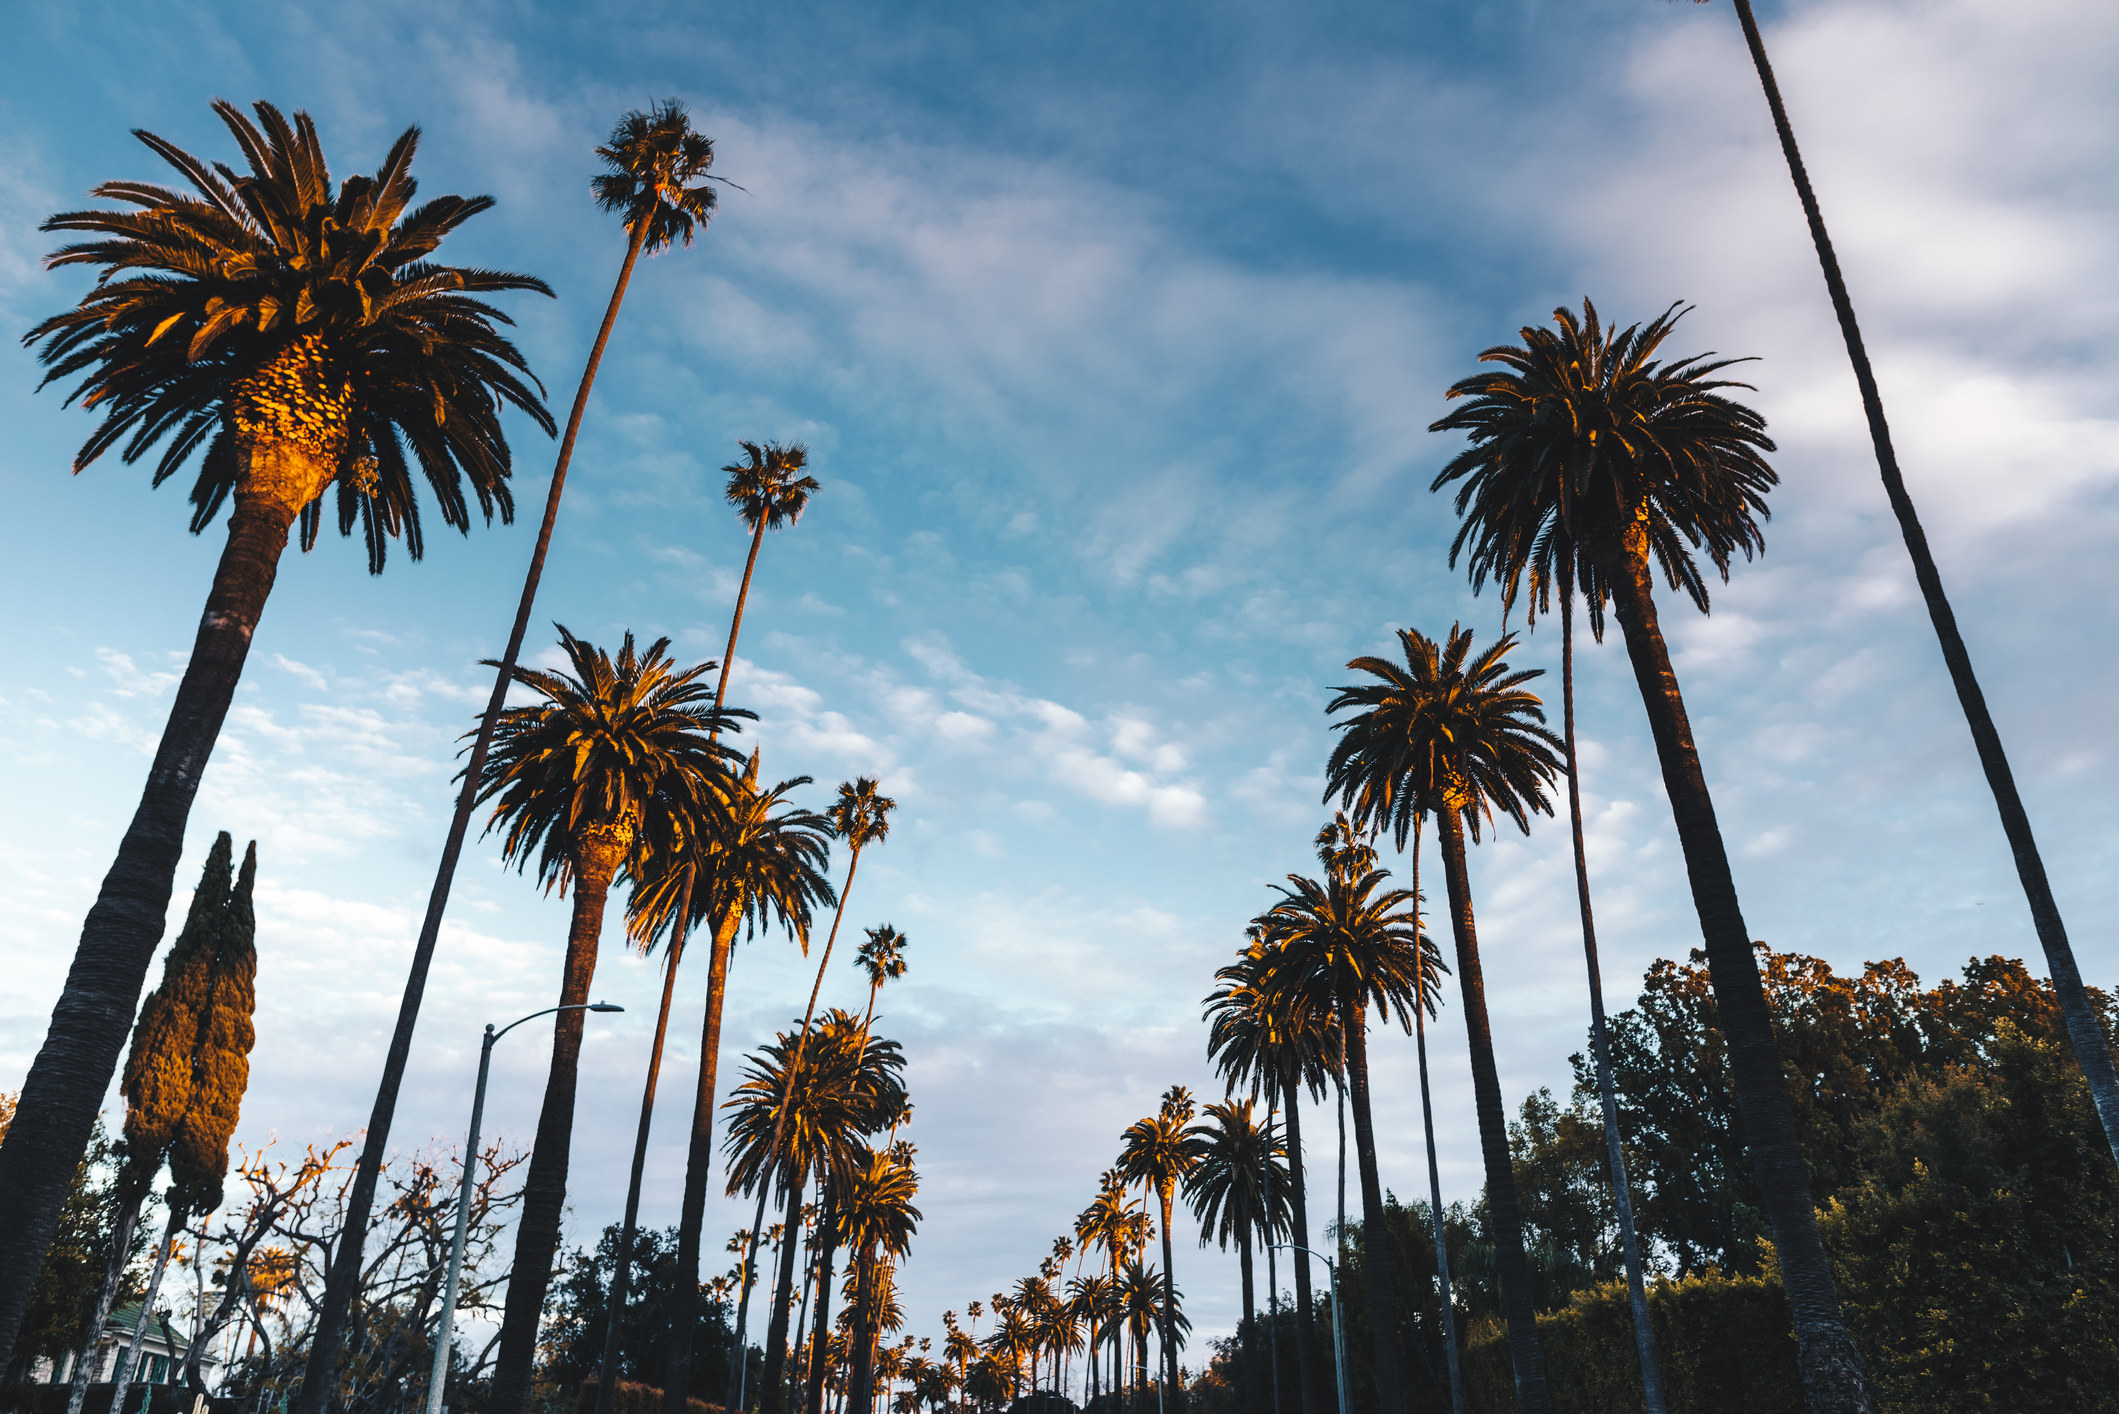 Palm trees on the street in Los Angeles.